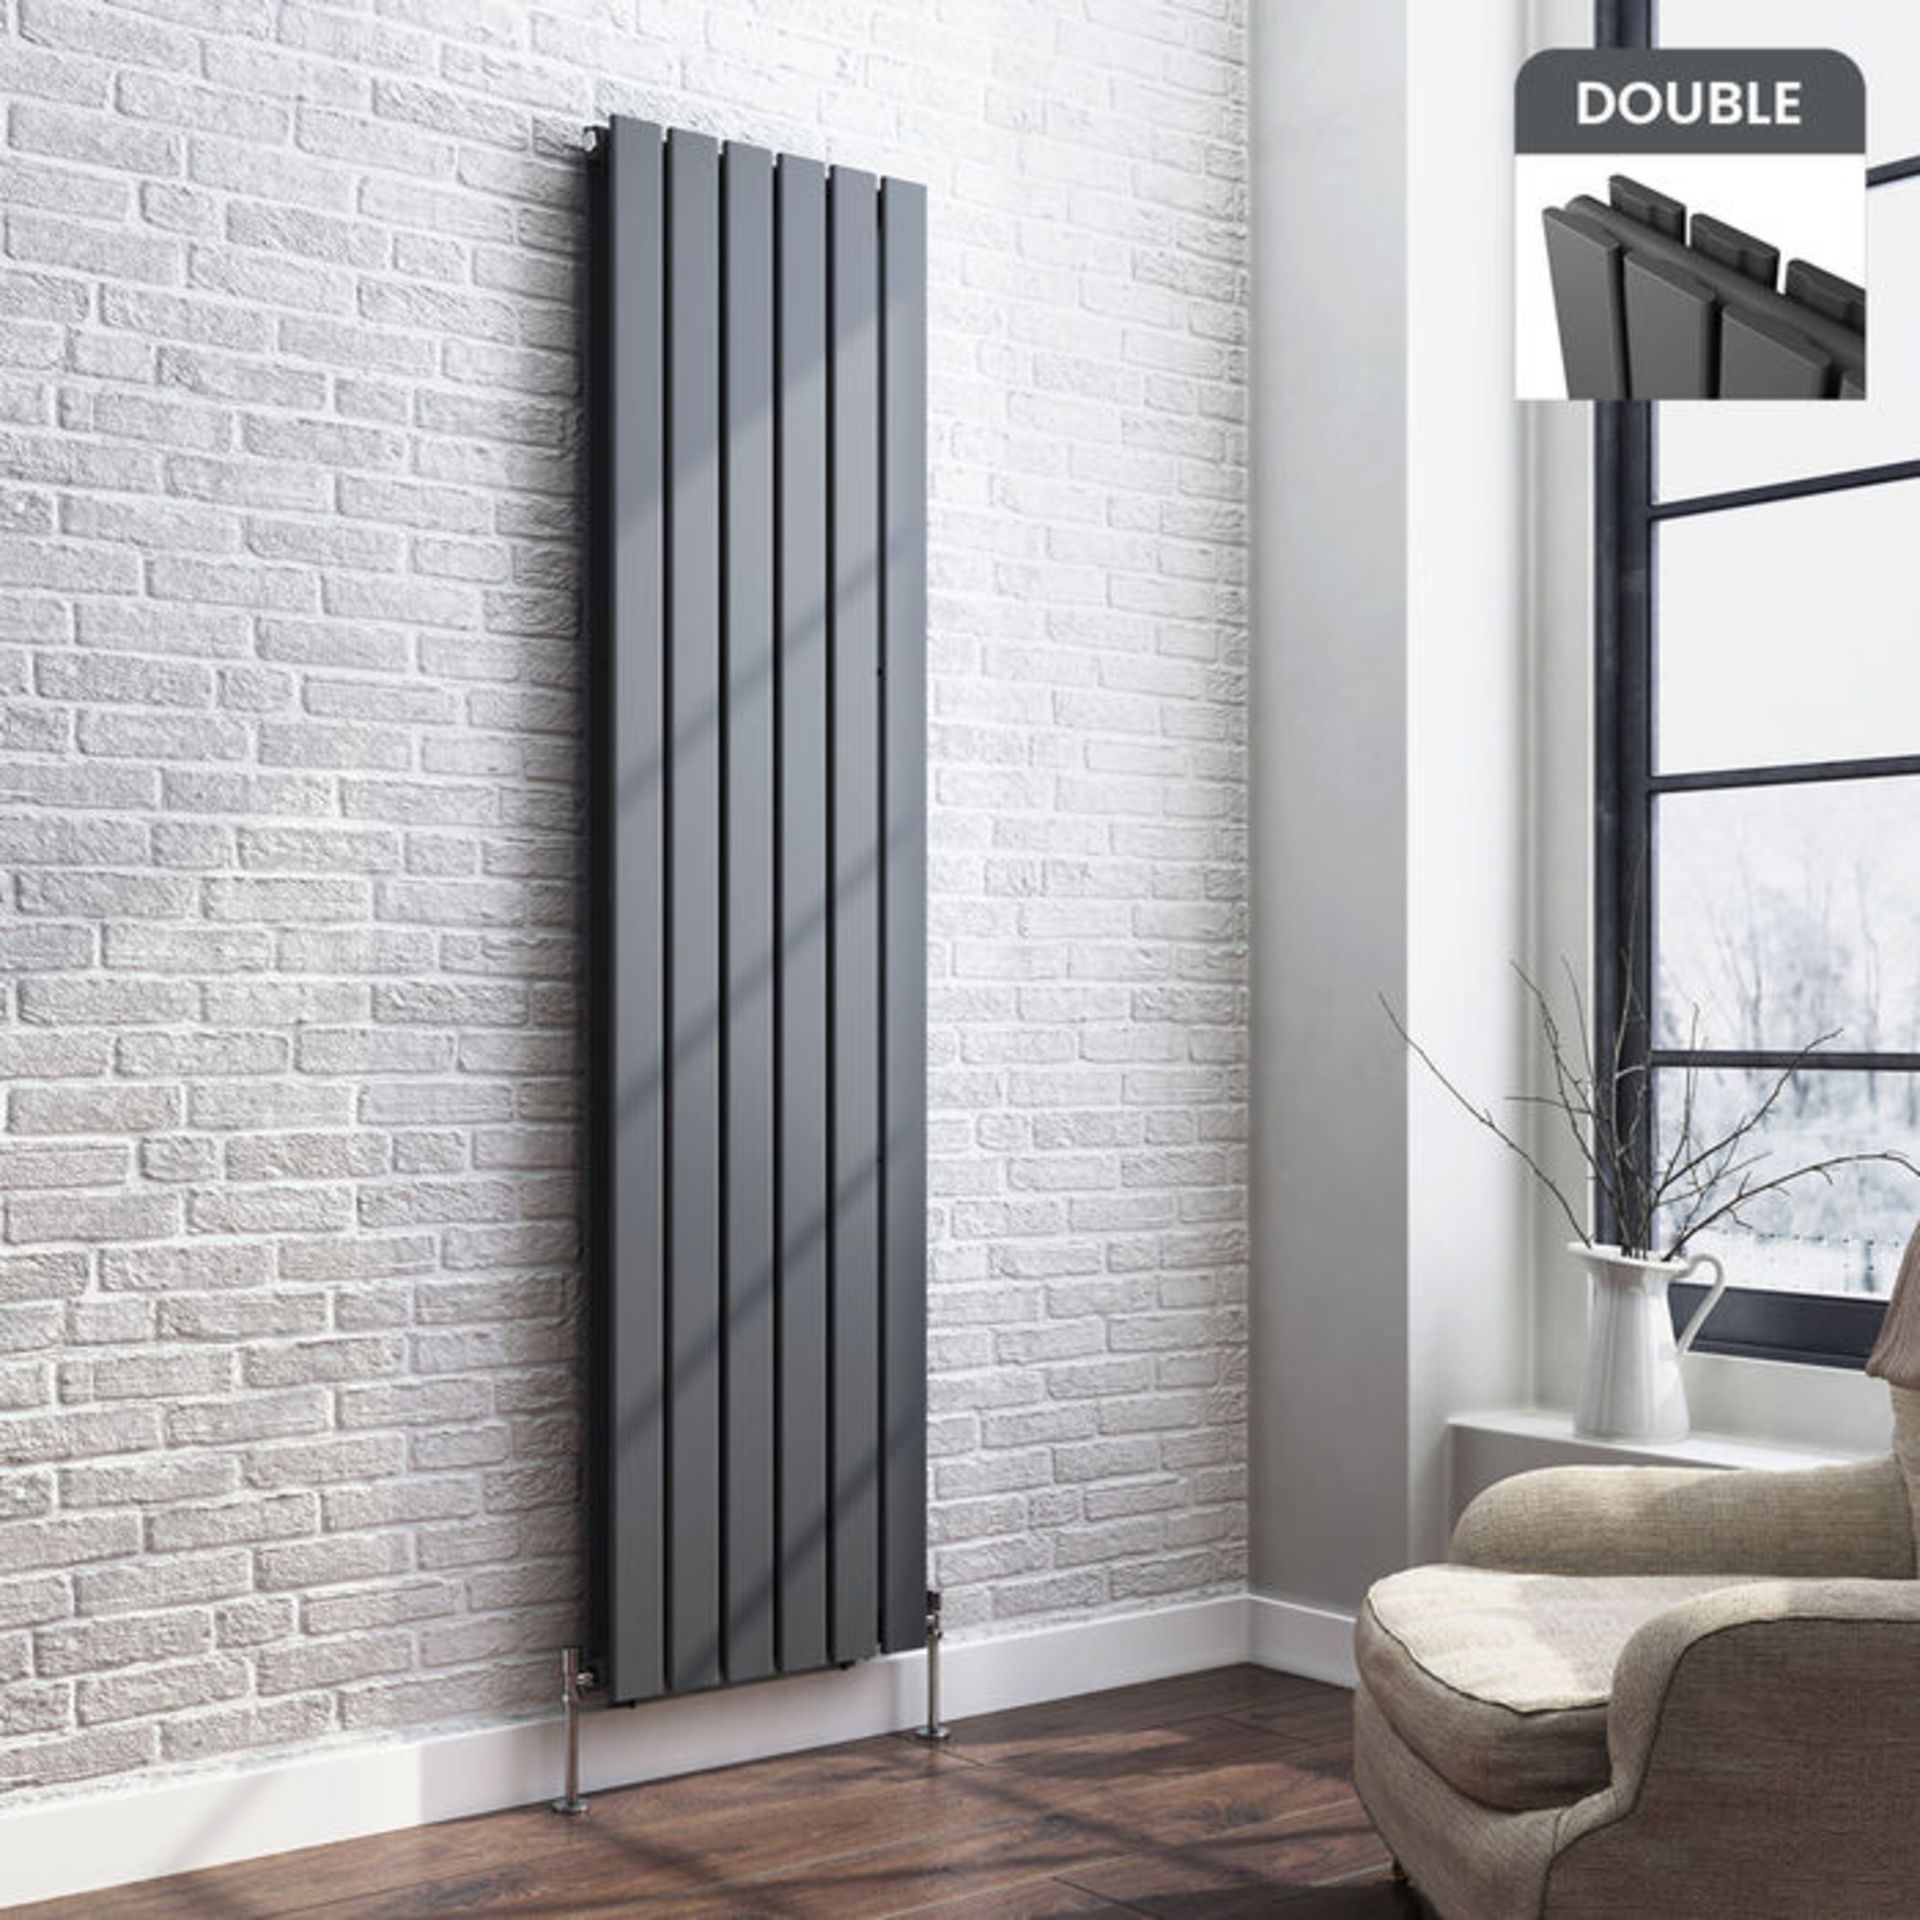 (TA271) 1800x458mm Anthracite Double Flat Panel Vertical Radiator. RRP £499.99. Made with low carbon